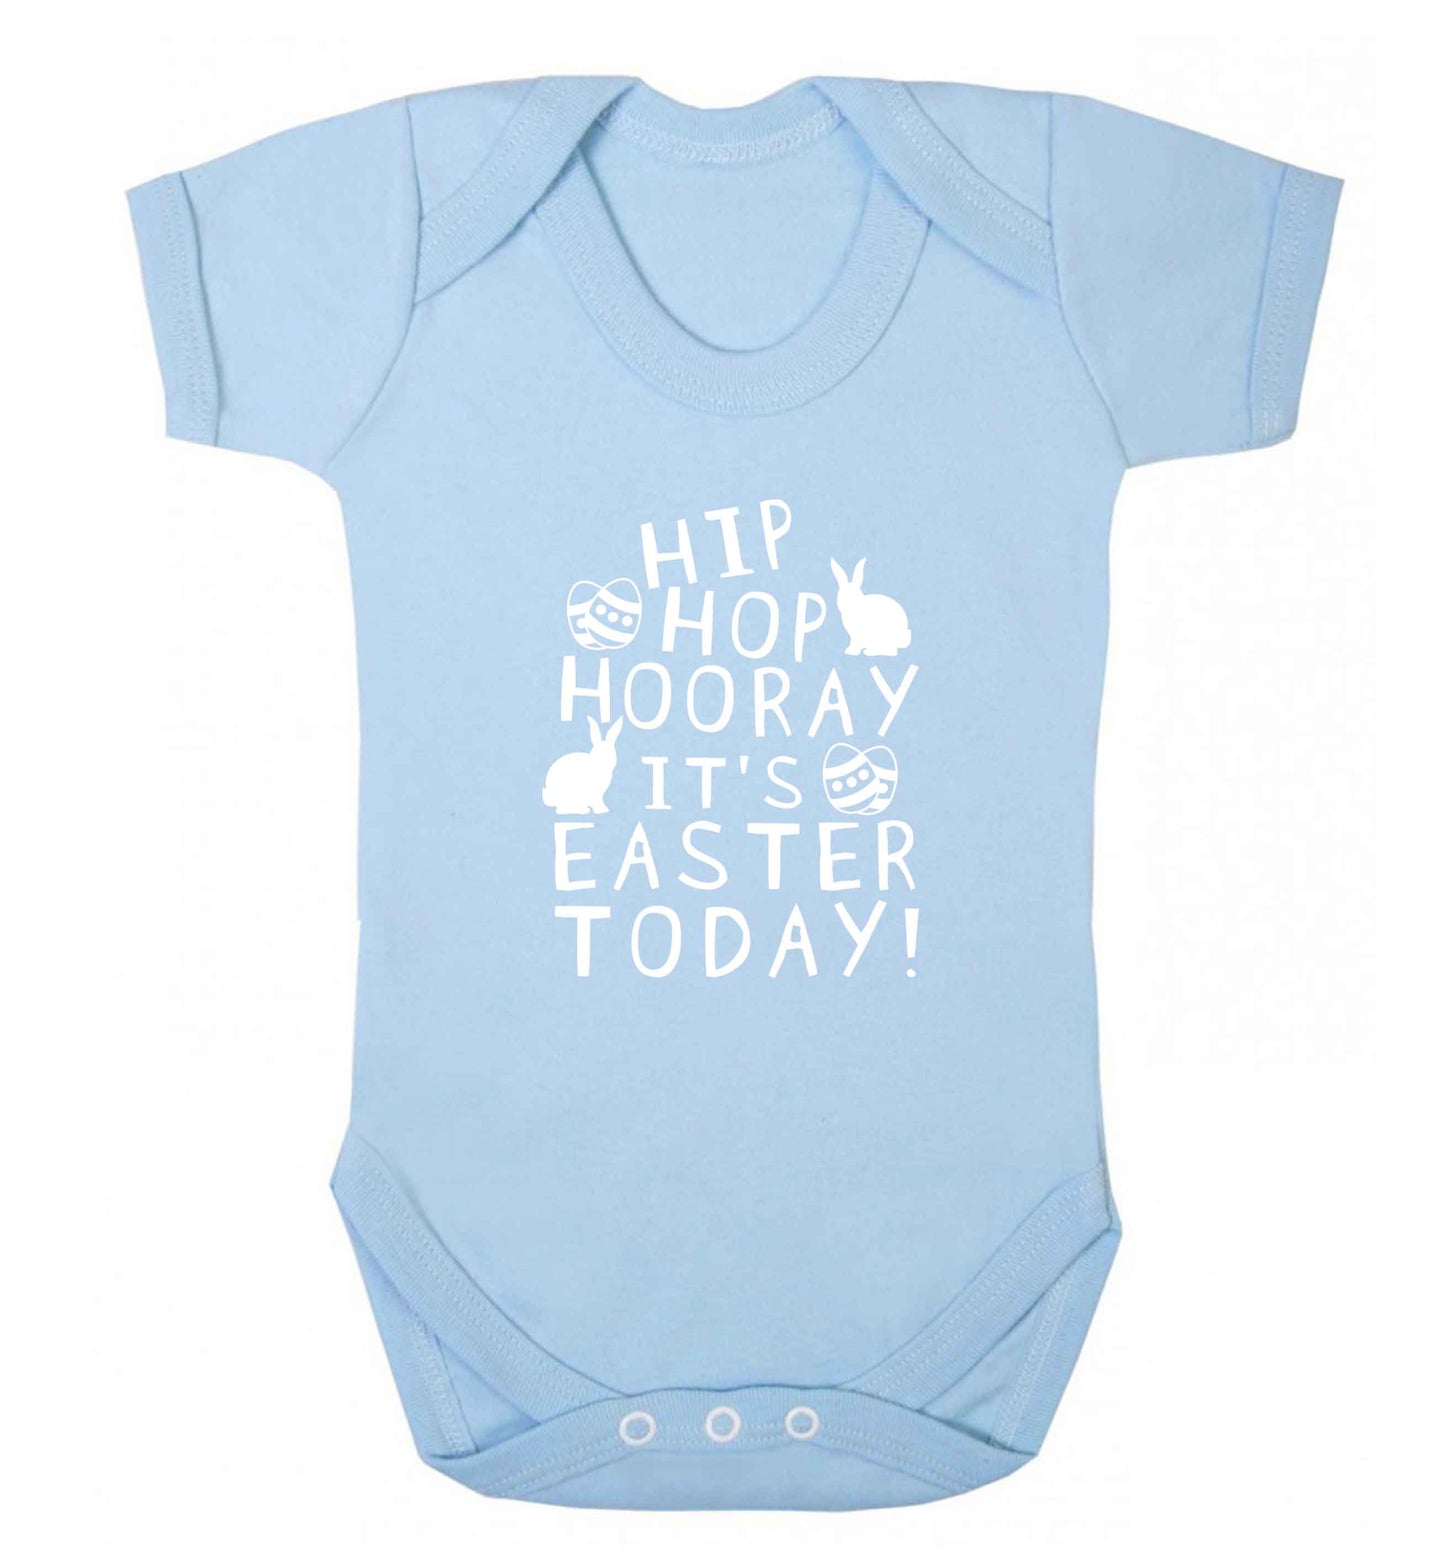 Hip hip hooray it's Easter today! baby vest pale blue 18-24 months